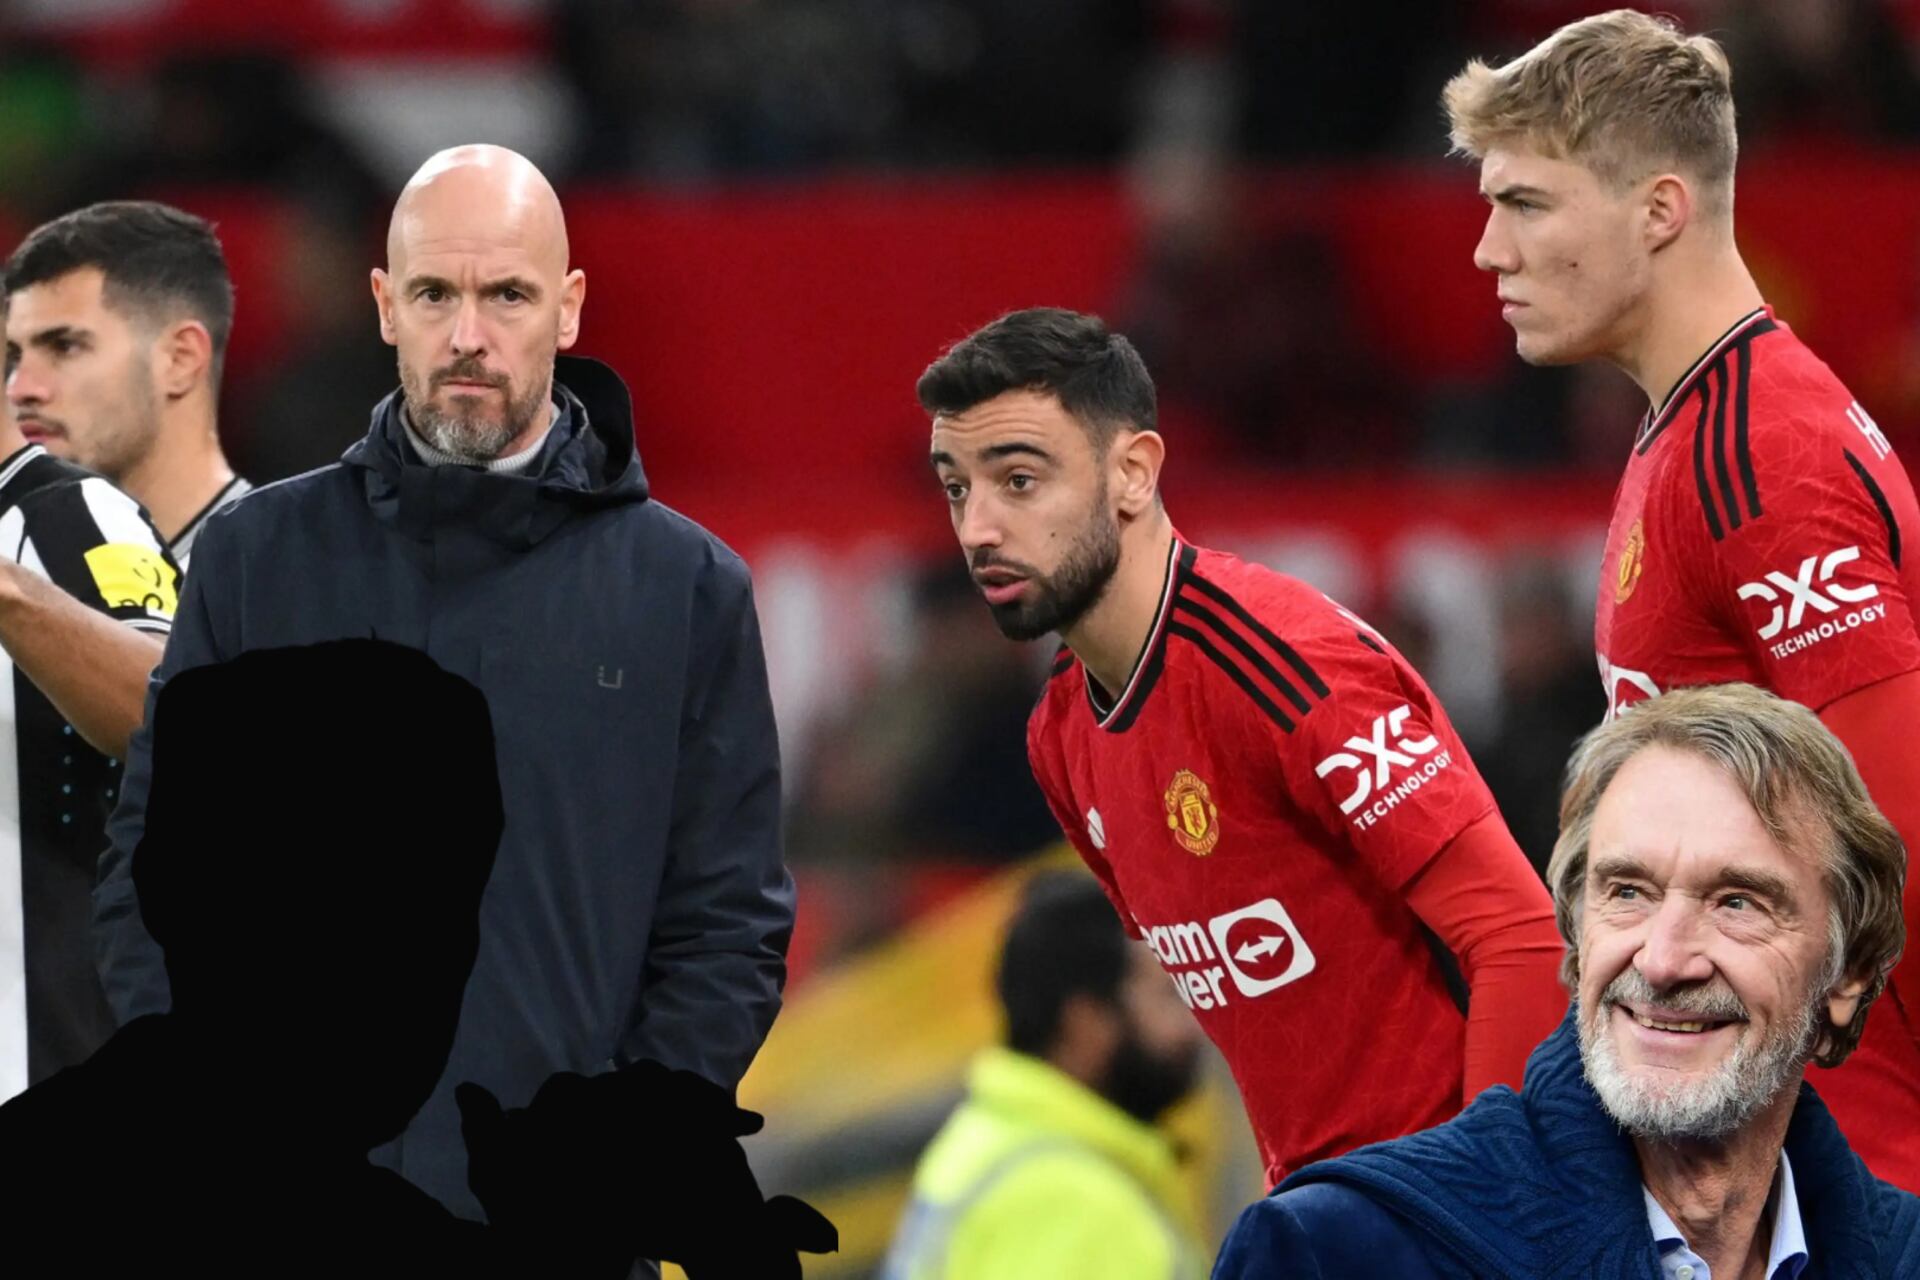 Shocking, Ratcliffe to replace Ten Hag with an English coach at Man United